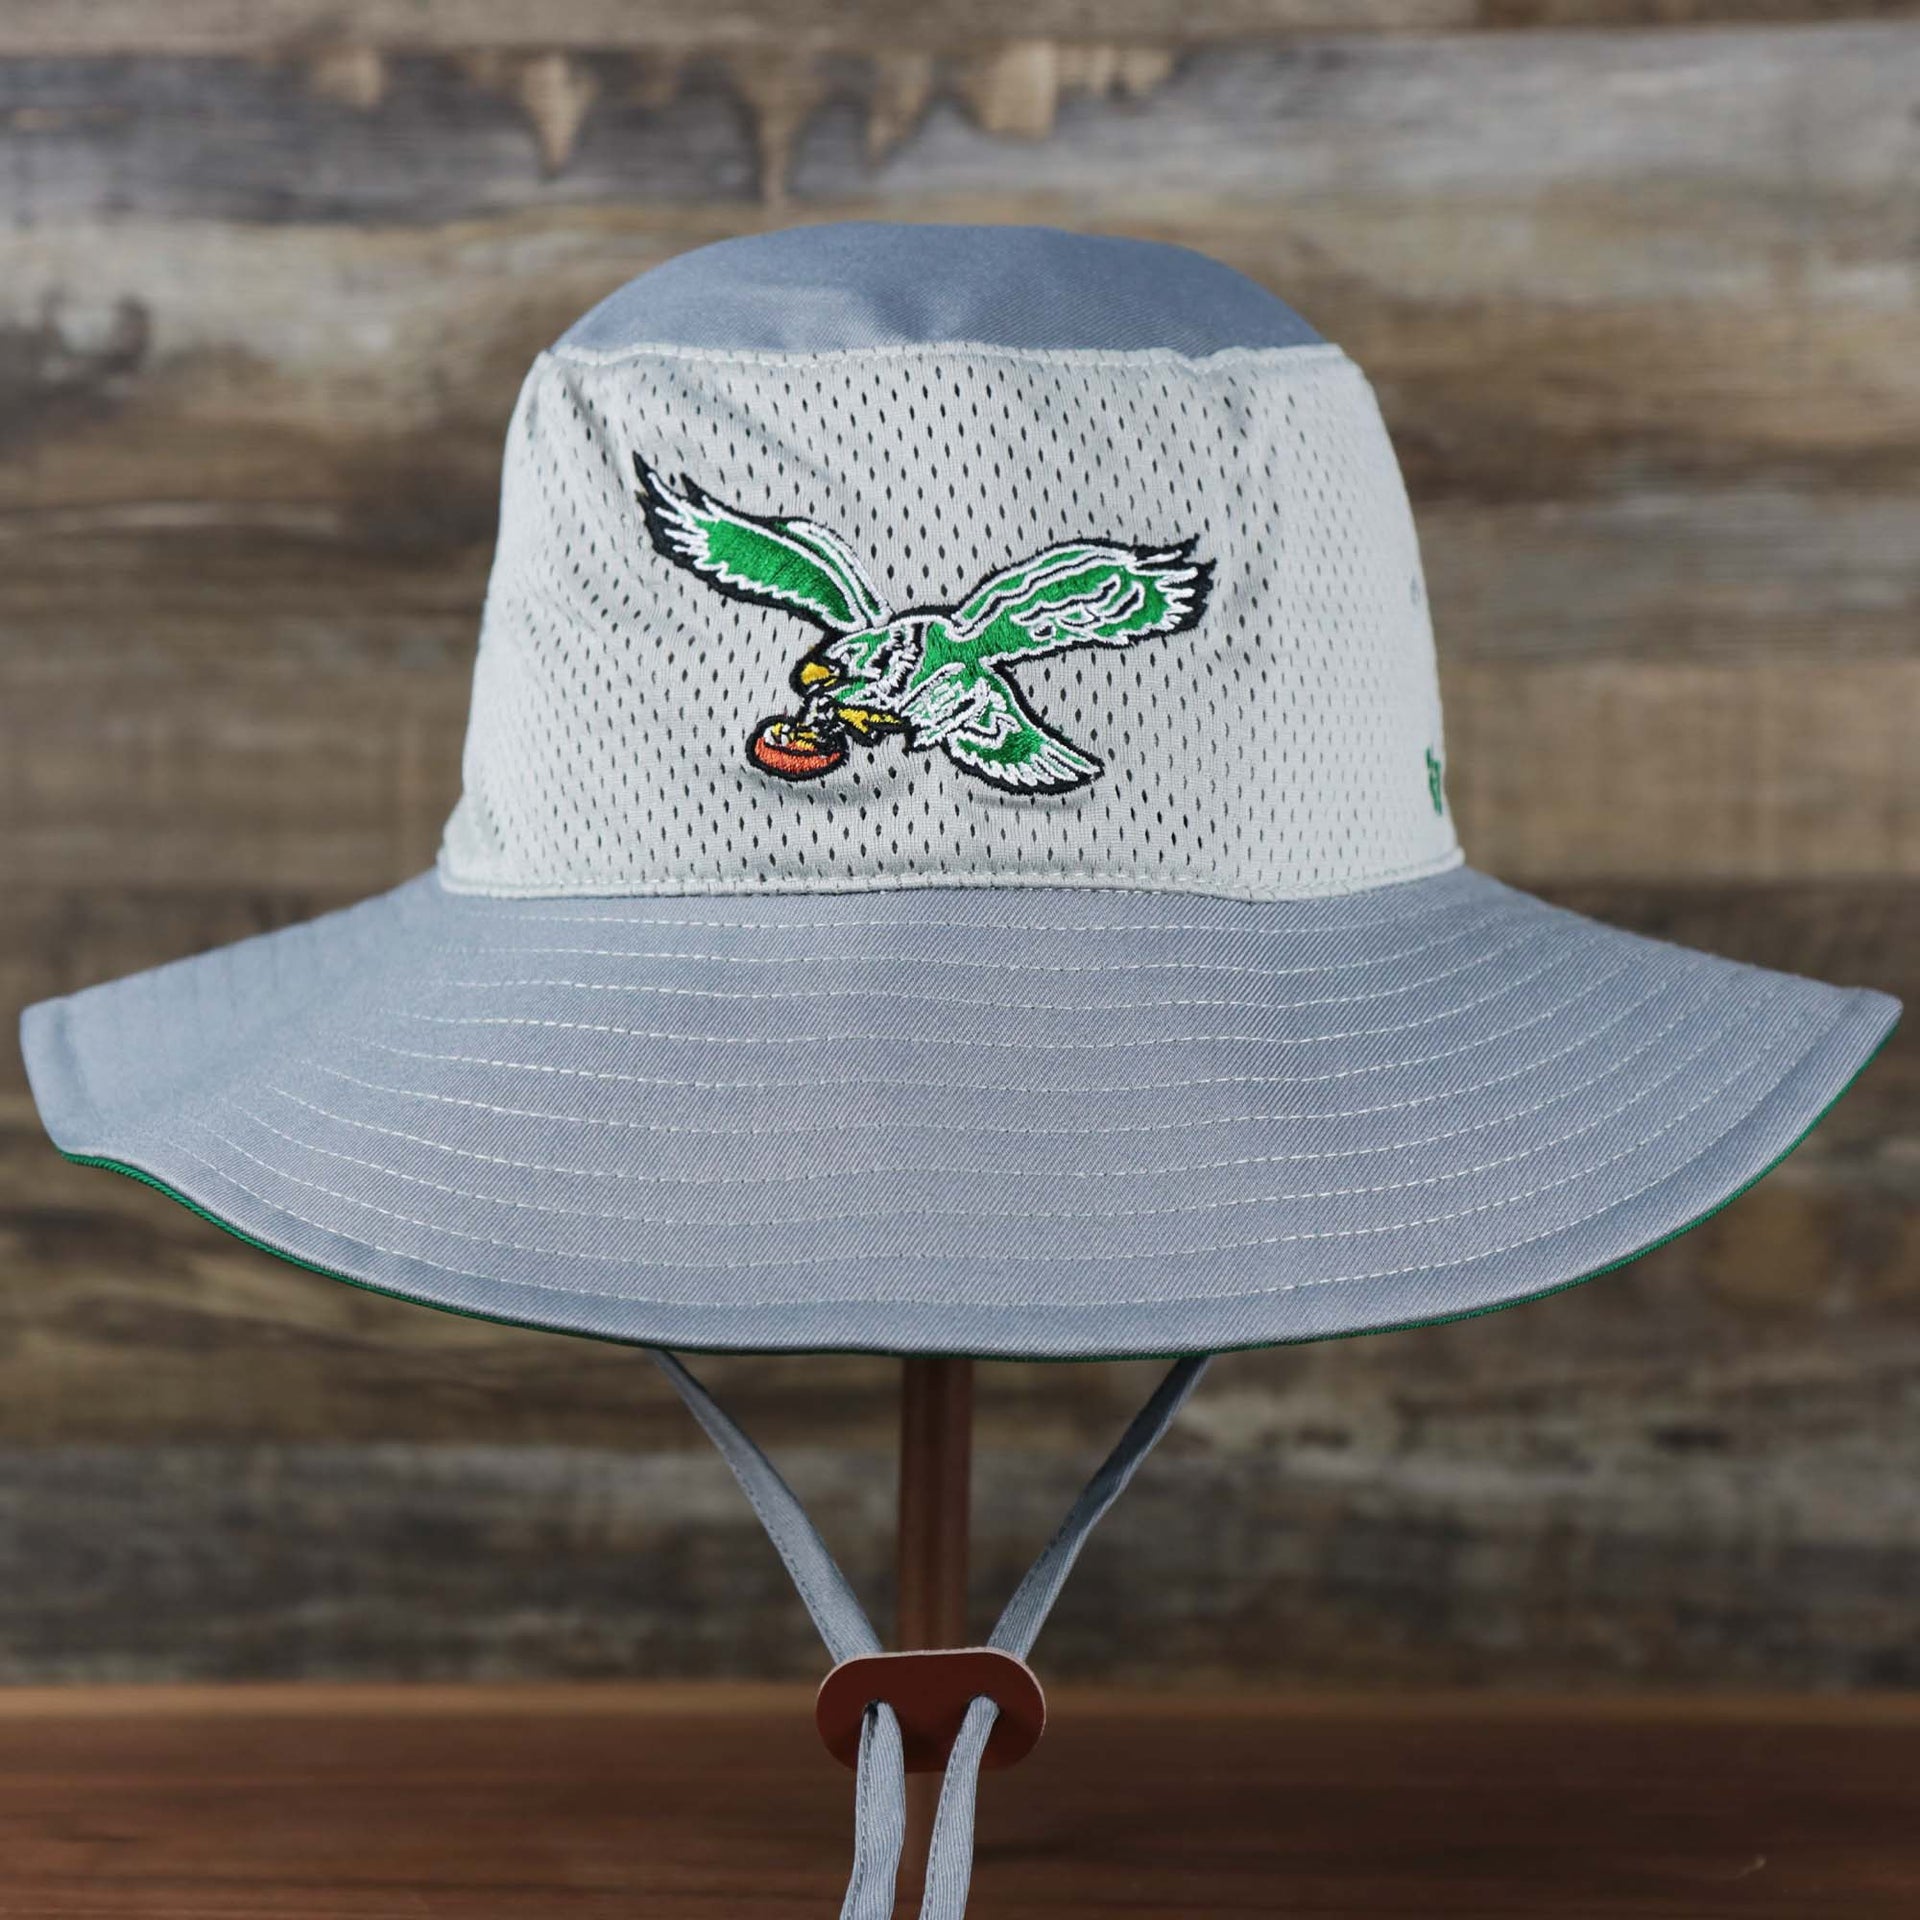 The front of the Throwback Philadelphia Eagles Panama Pail Bucket Hat | 47 Brand, Gray